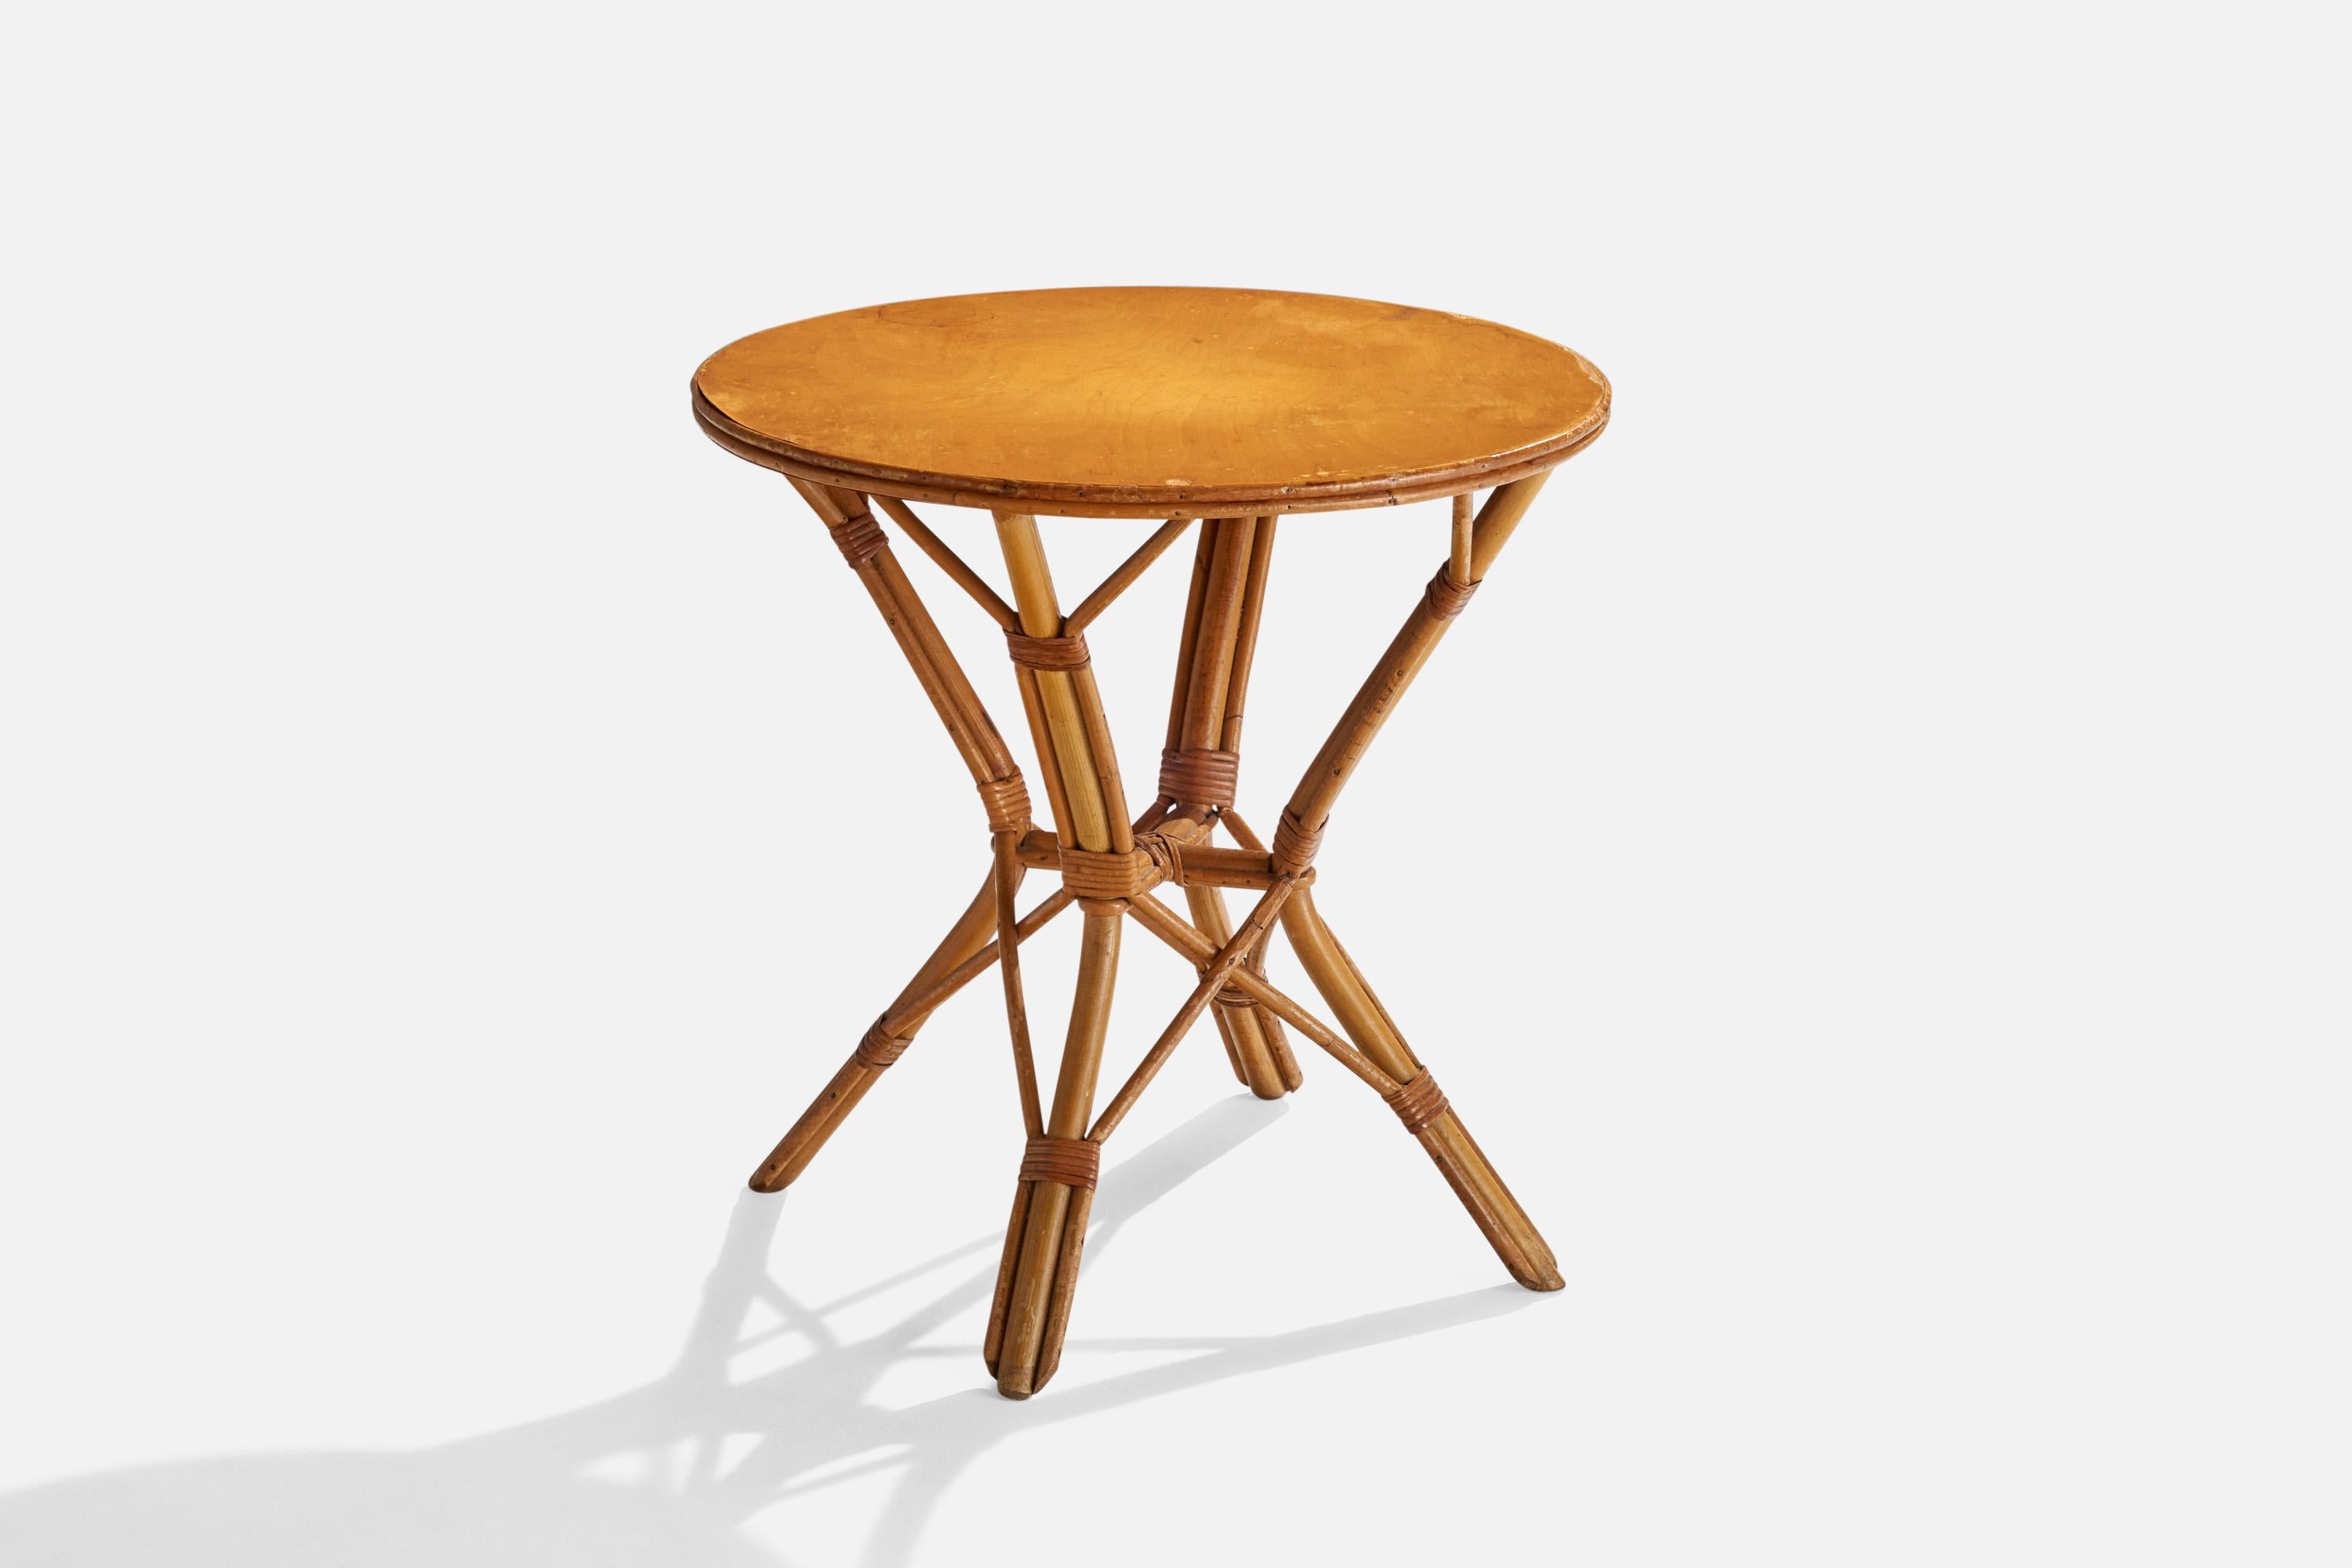 A bamboo, rattan and wood side table designed and produced in the US, c. 1950s.